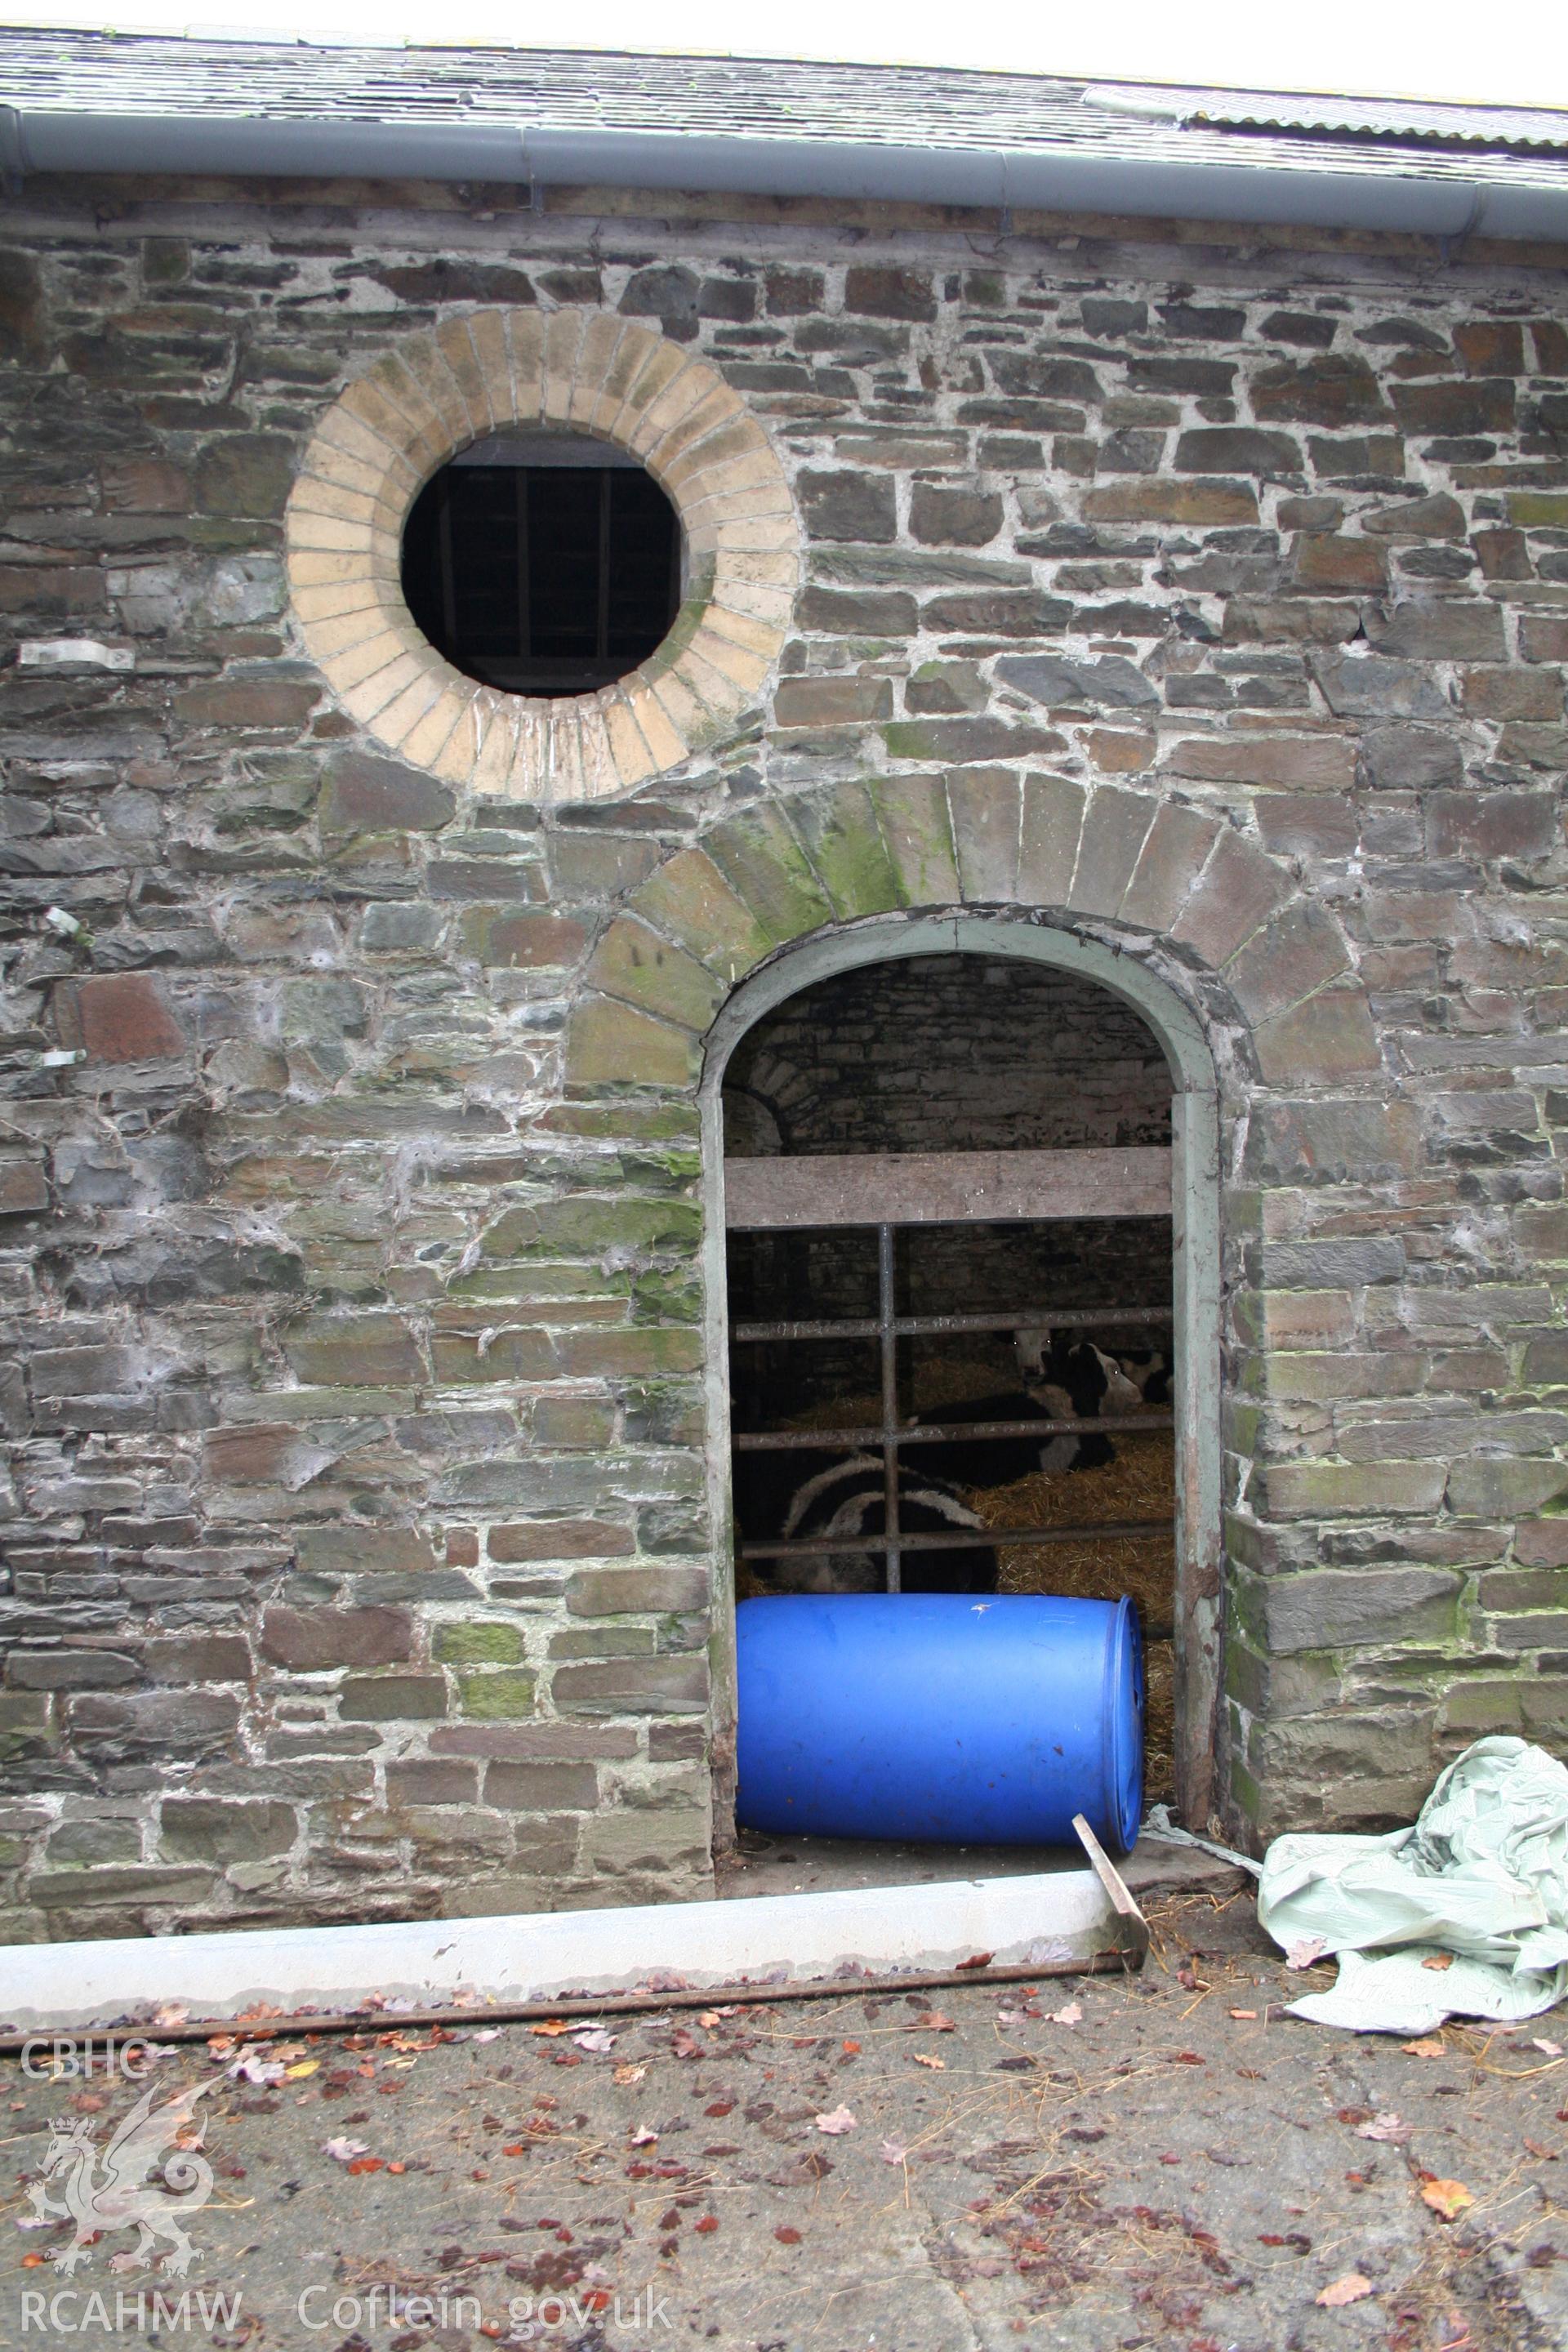 Exterior view of cattle shelter showing stone wall, brick archway and window circle. Photographic survey of the exterior of the farm buildings at Tan-y-Graig Farm, Llanfarian, Aberystwyth. Conducted by Geoff Ward and John Wiles, 11th December 2006.